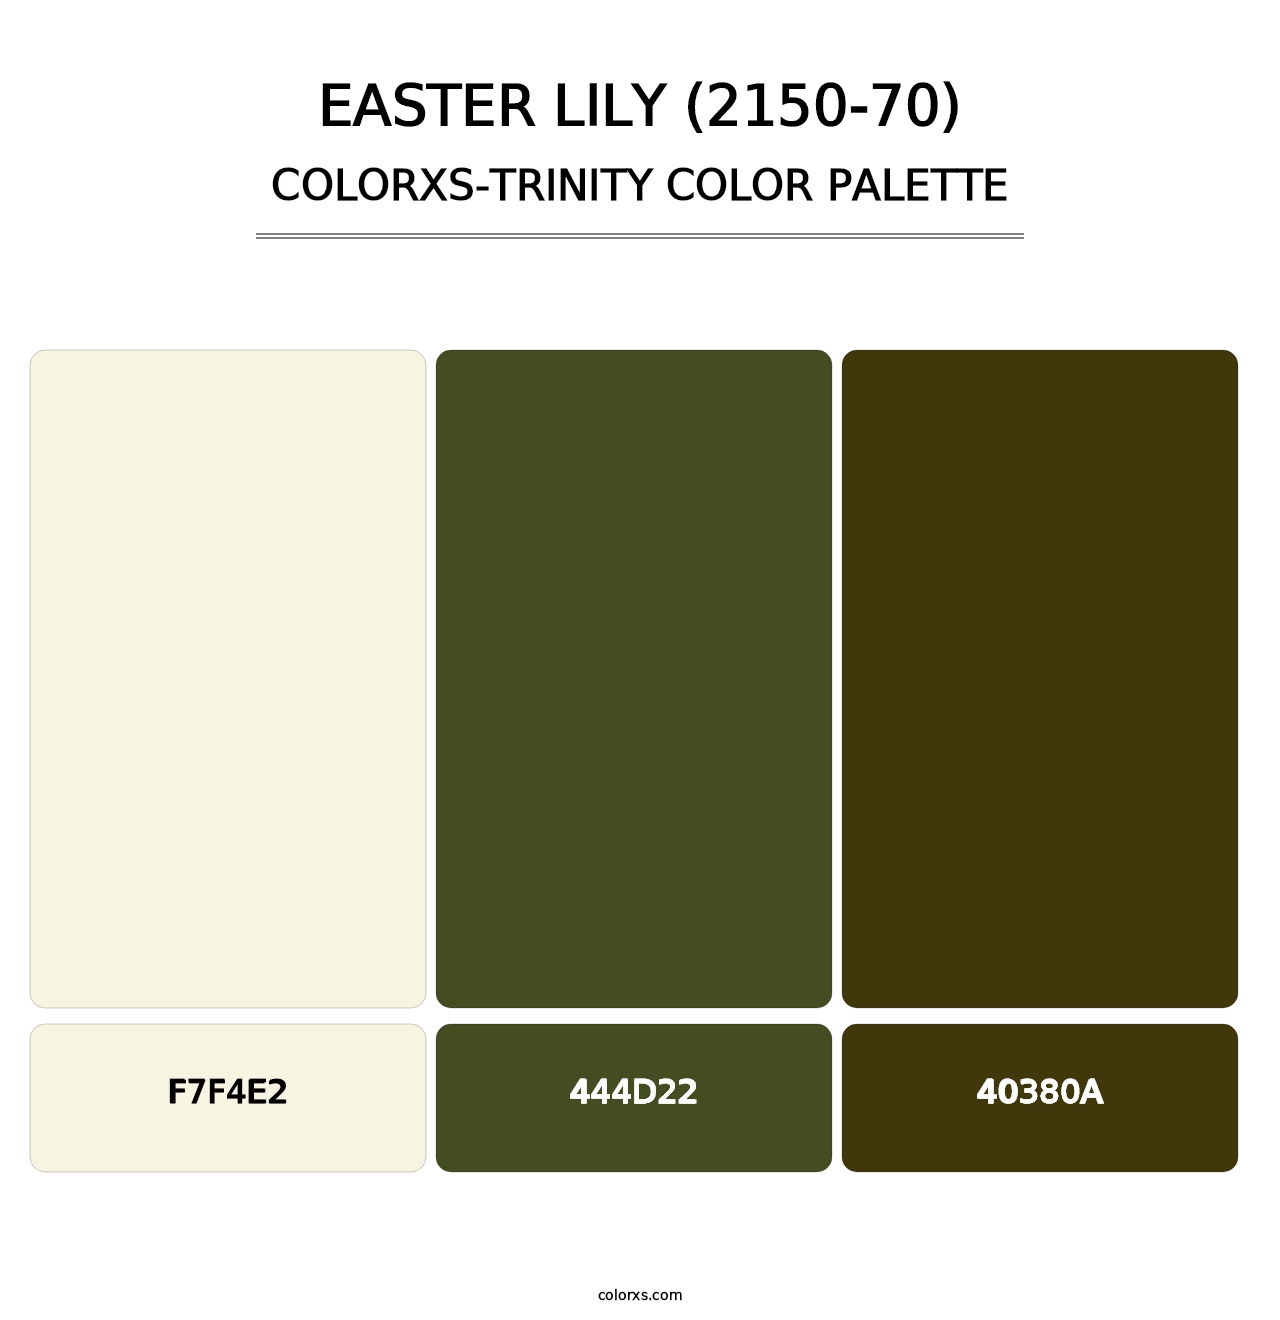 Easter Lily (2150-70) - Colorxs Trinity Palette